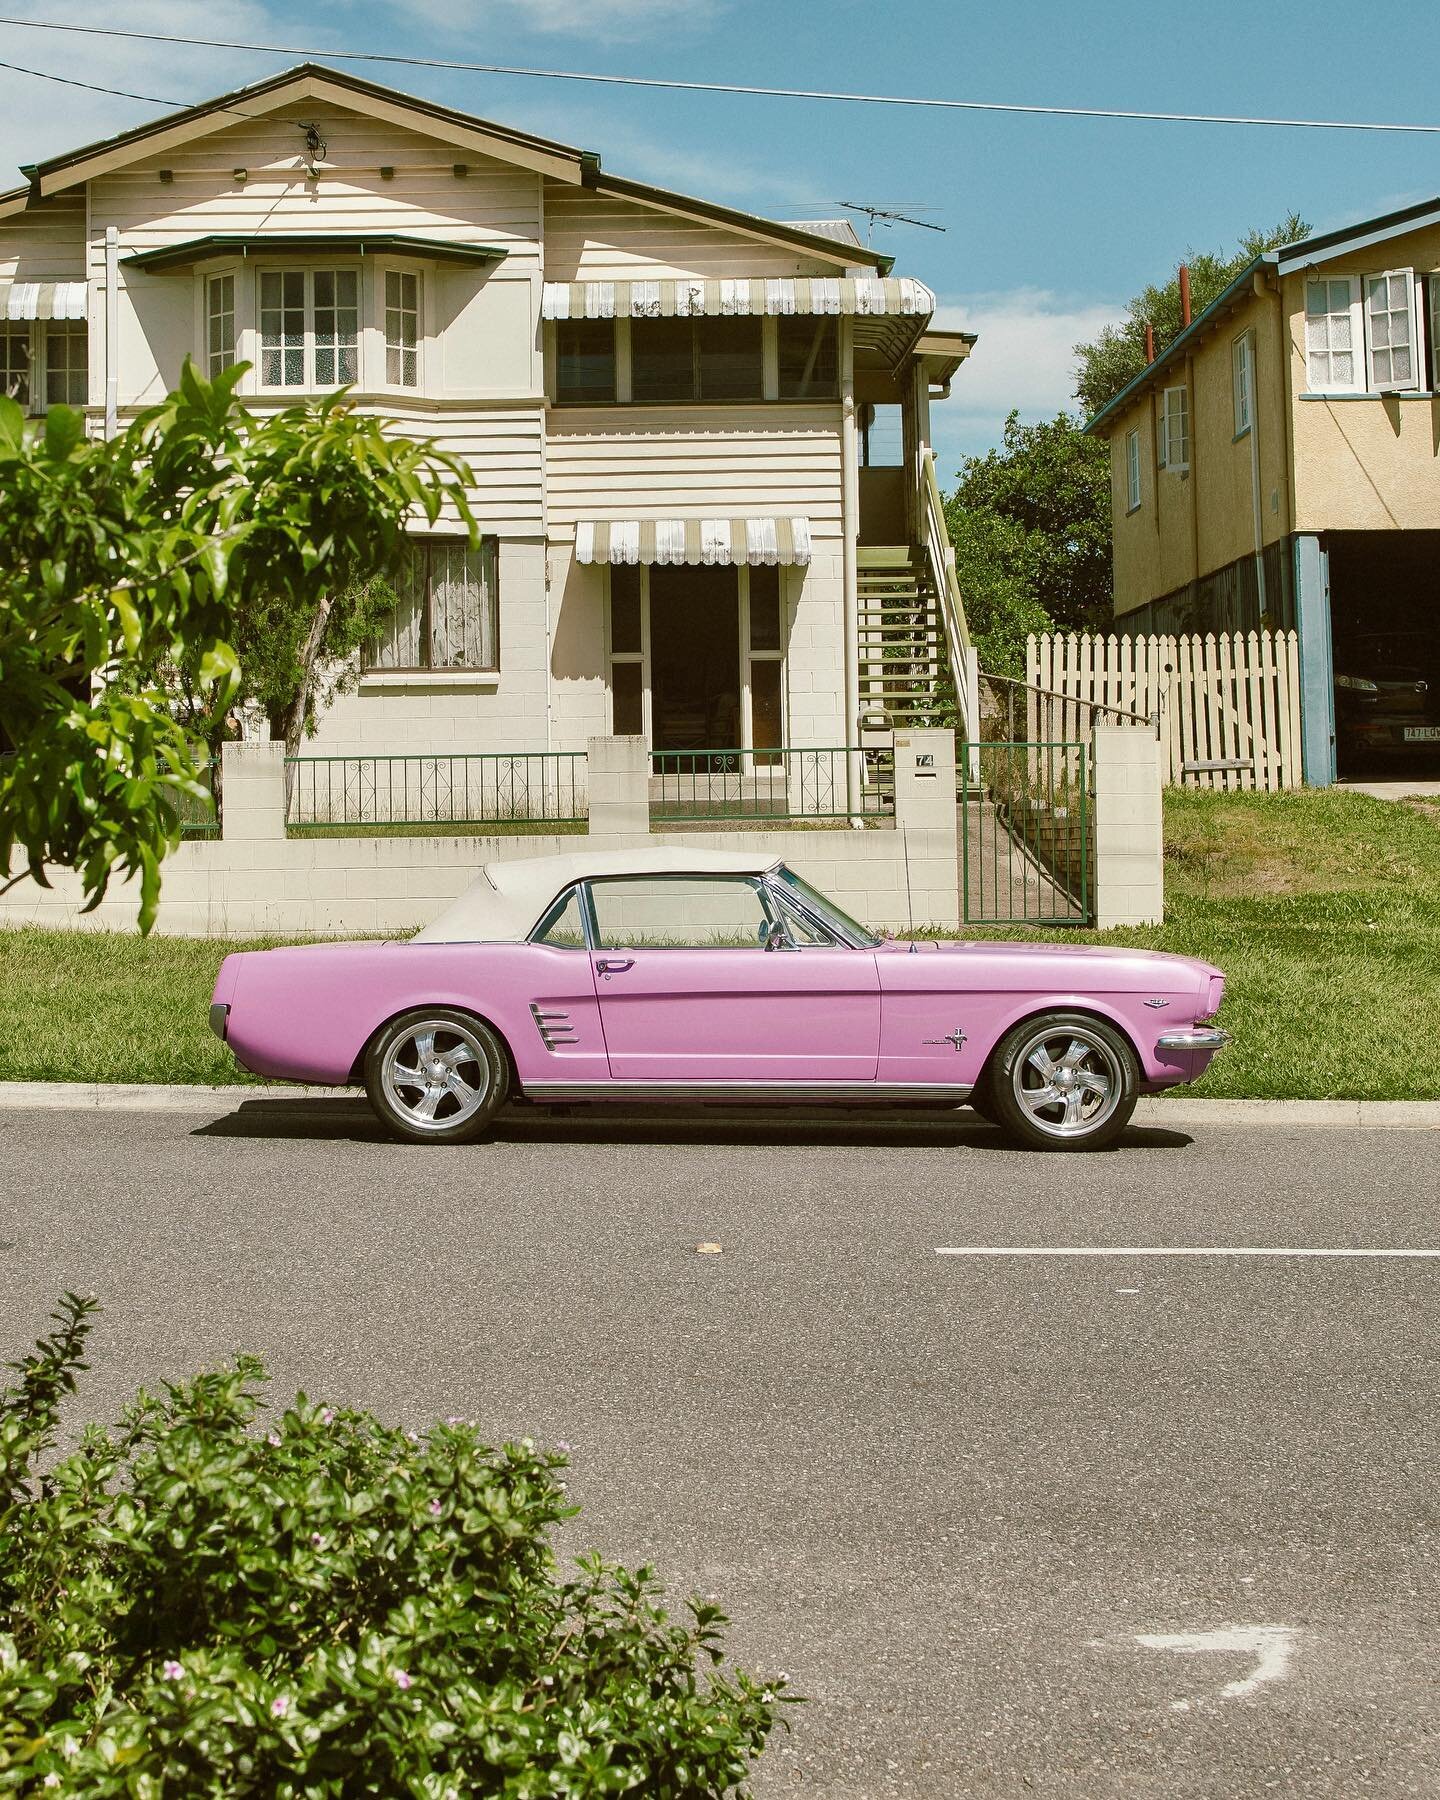 barbie must be around somewhere 🌸🎀👛 

spotted on the casual suburban streets of brisbane. diggin the retro ish vibe of it all